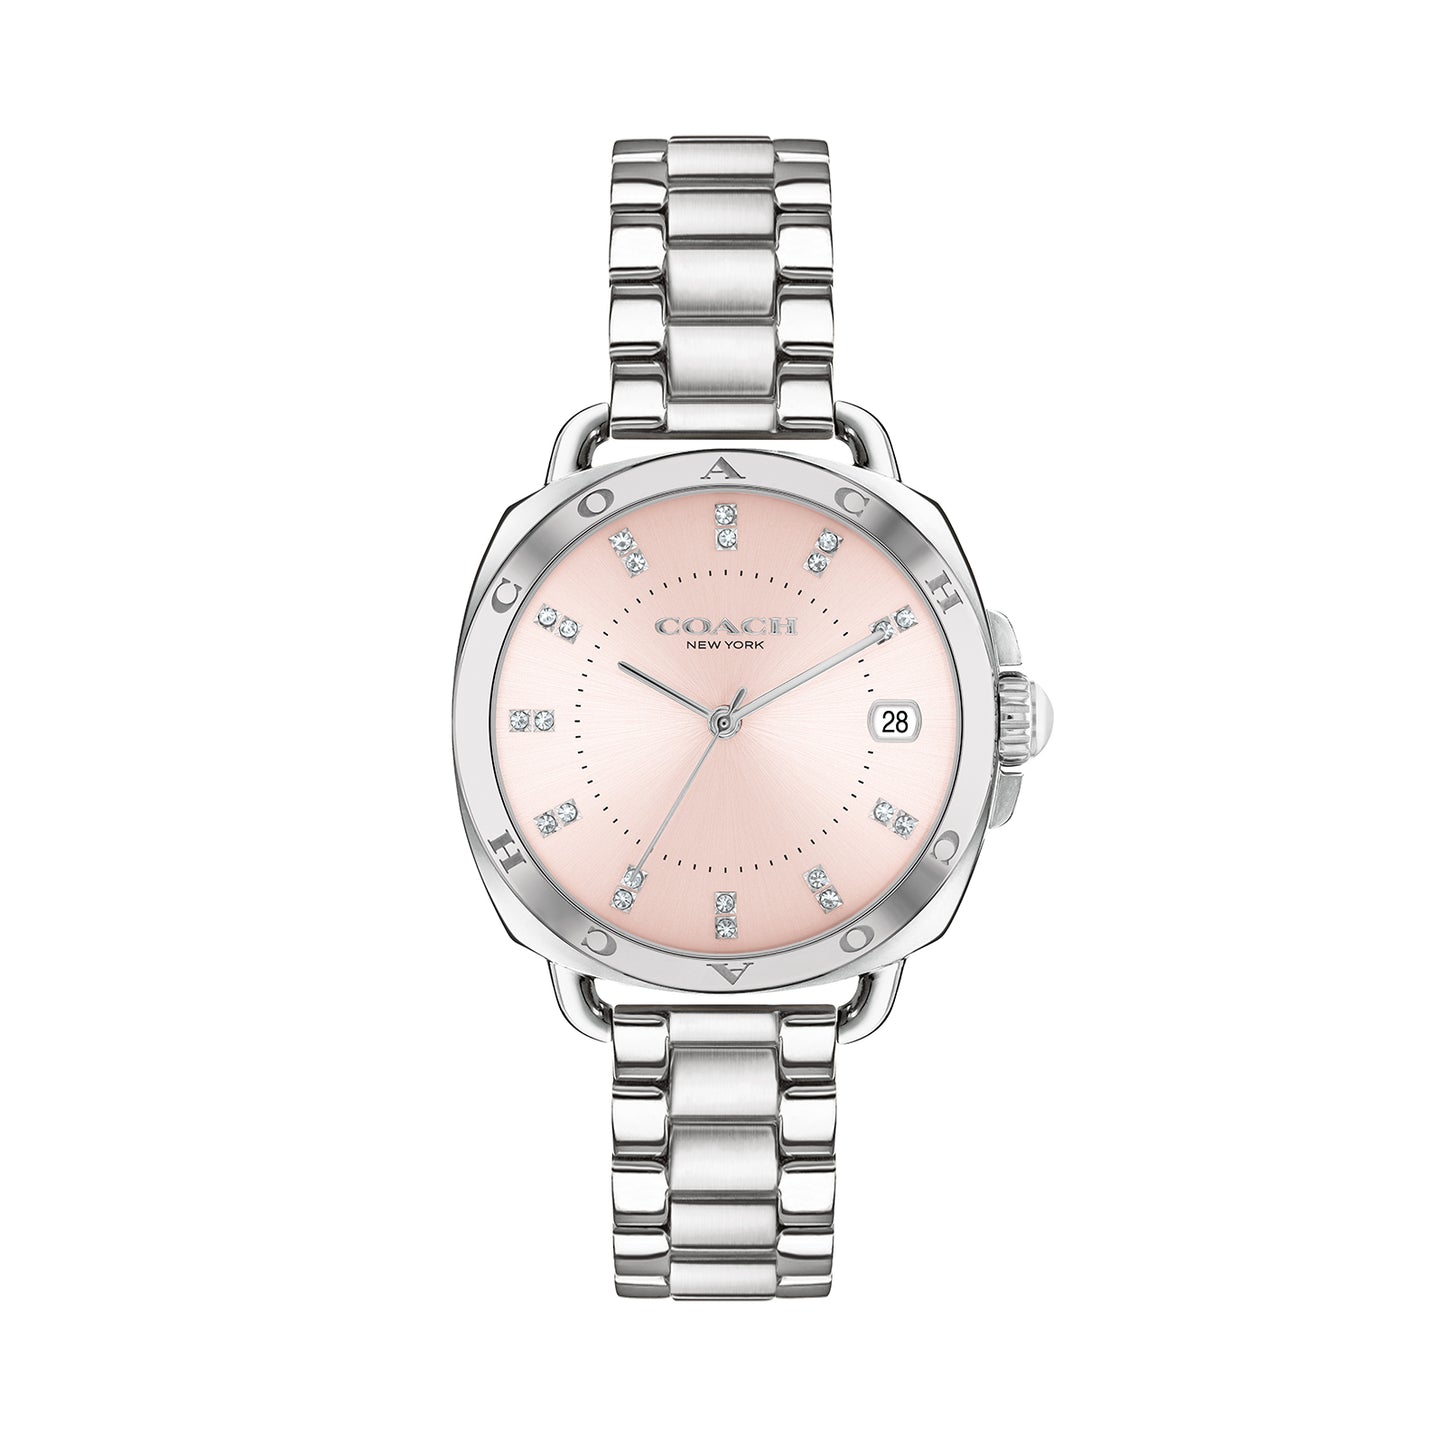 Coach 14504156 Women's Stainless Steel Bracelet and Pink Dial Quartz Watch